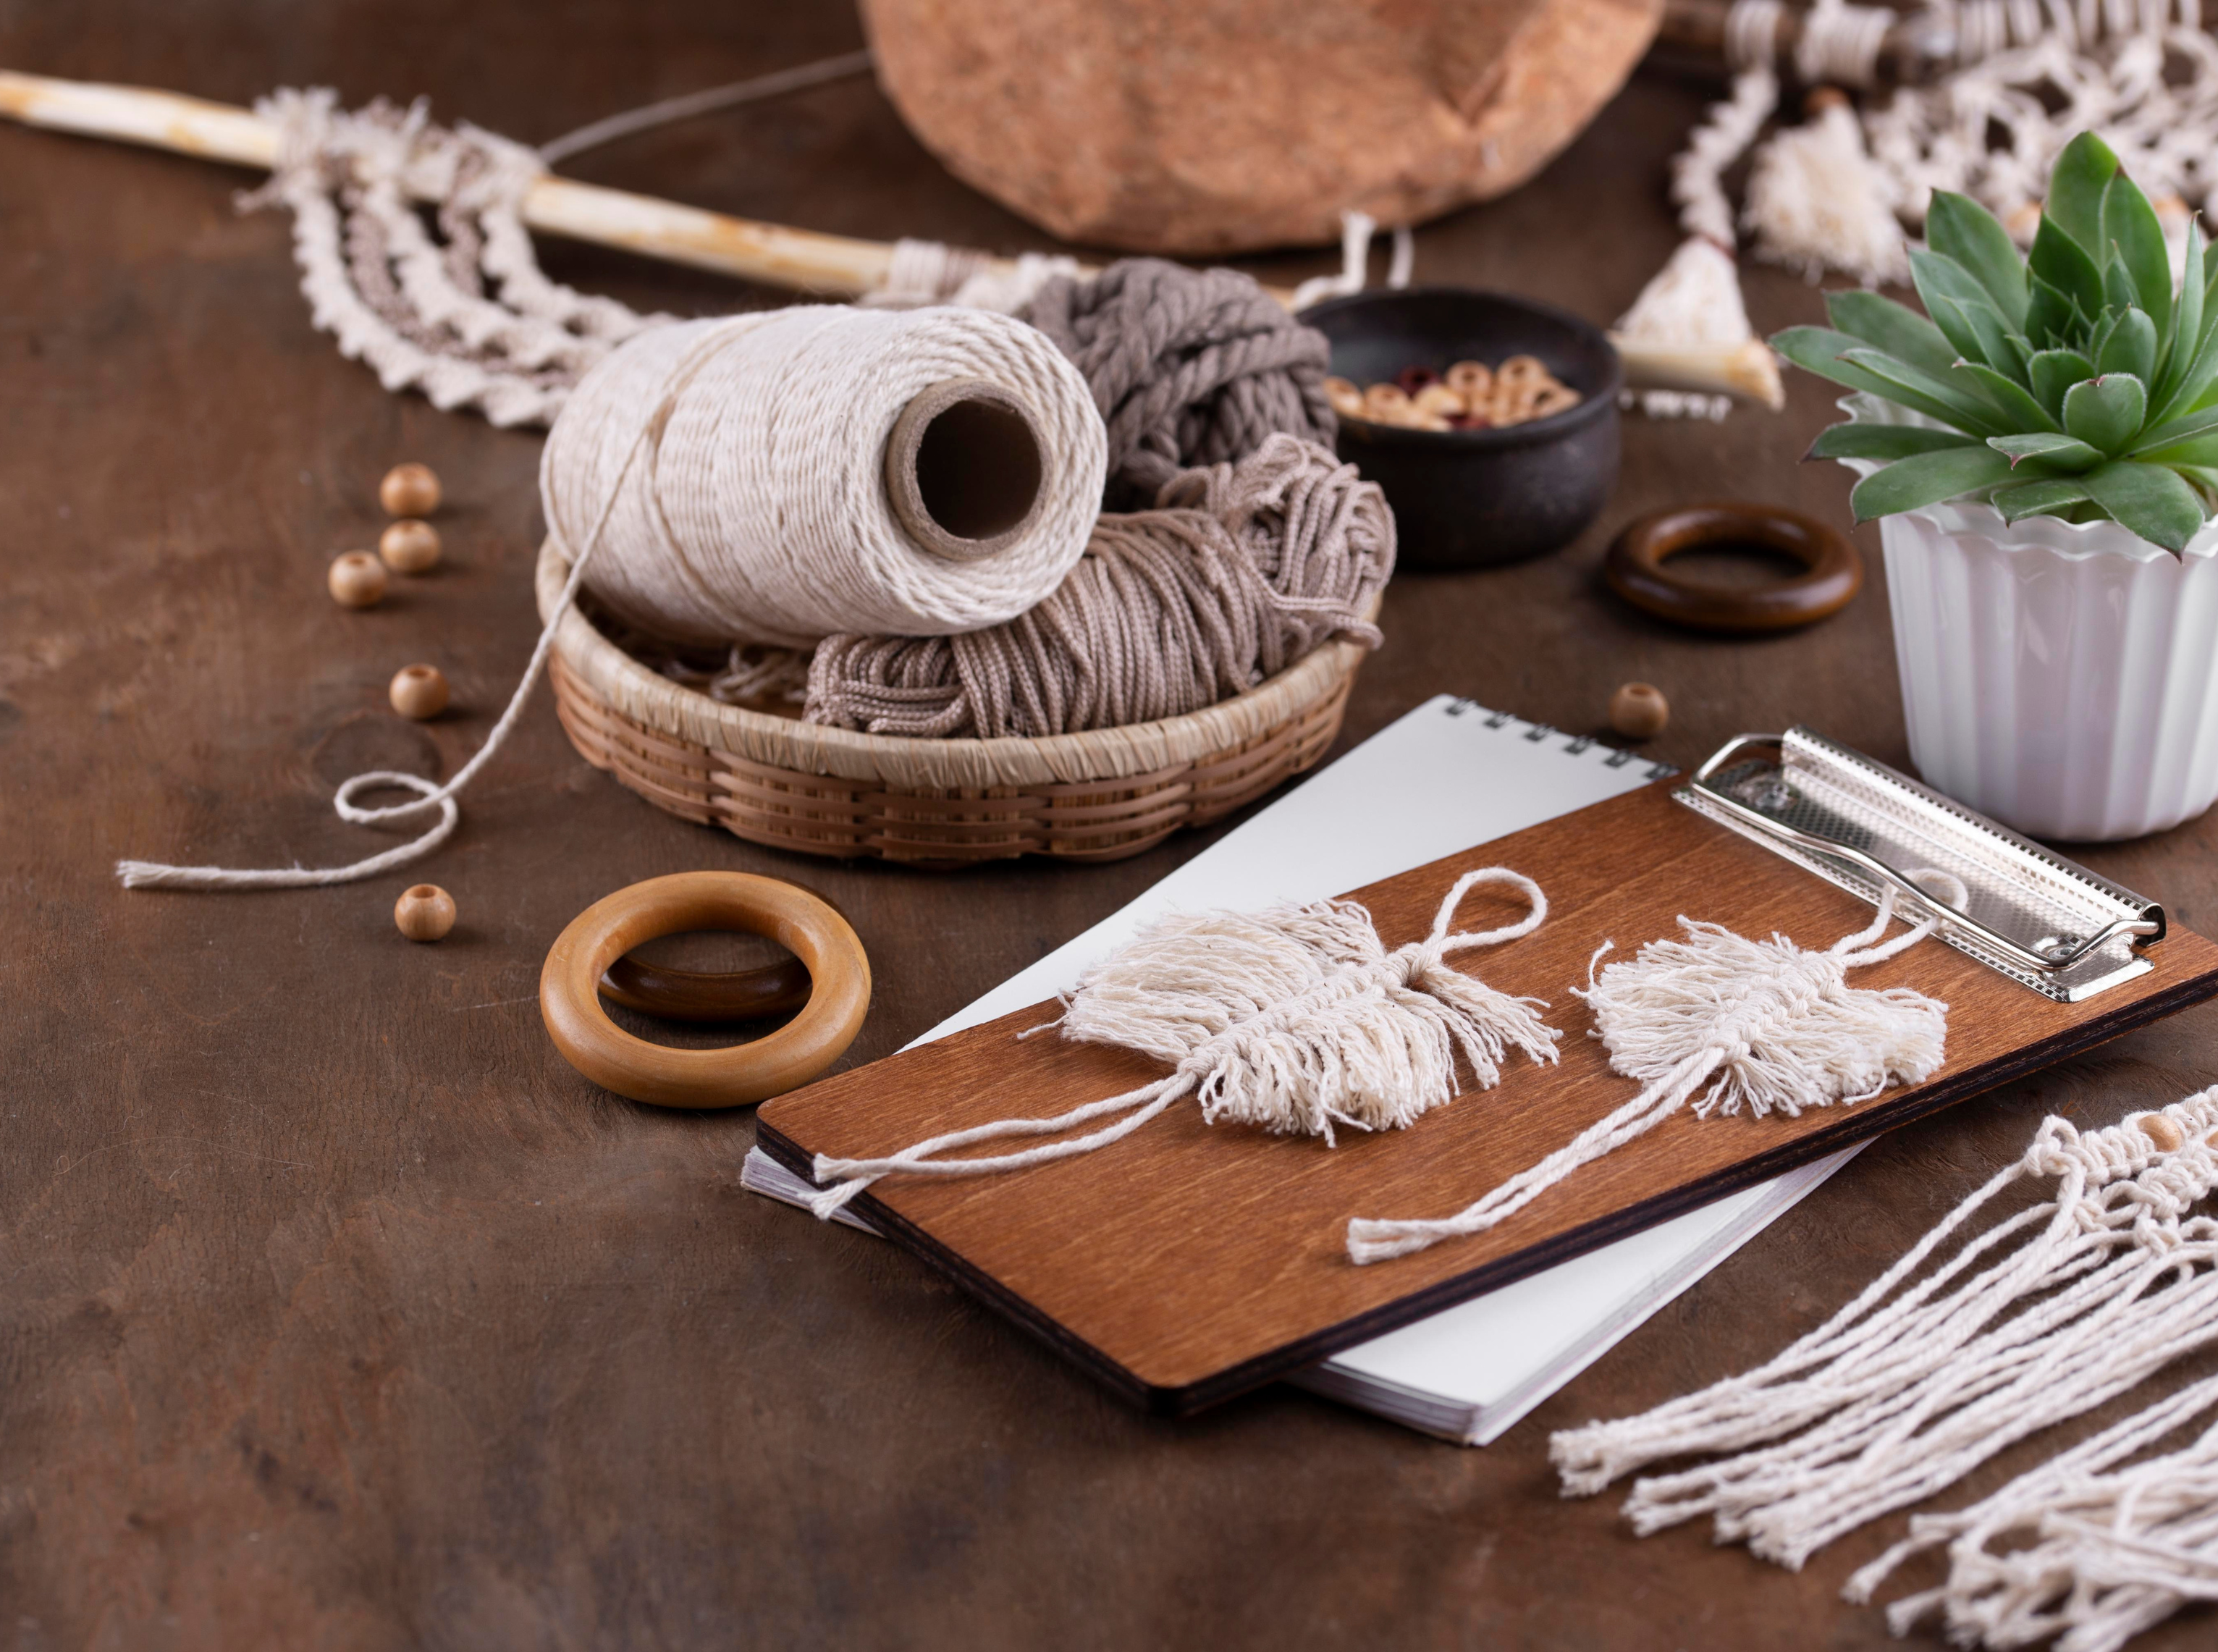 20 Easy DIY Crafts to Make with Cotton Macrame Cord Kit – Ecofynd